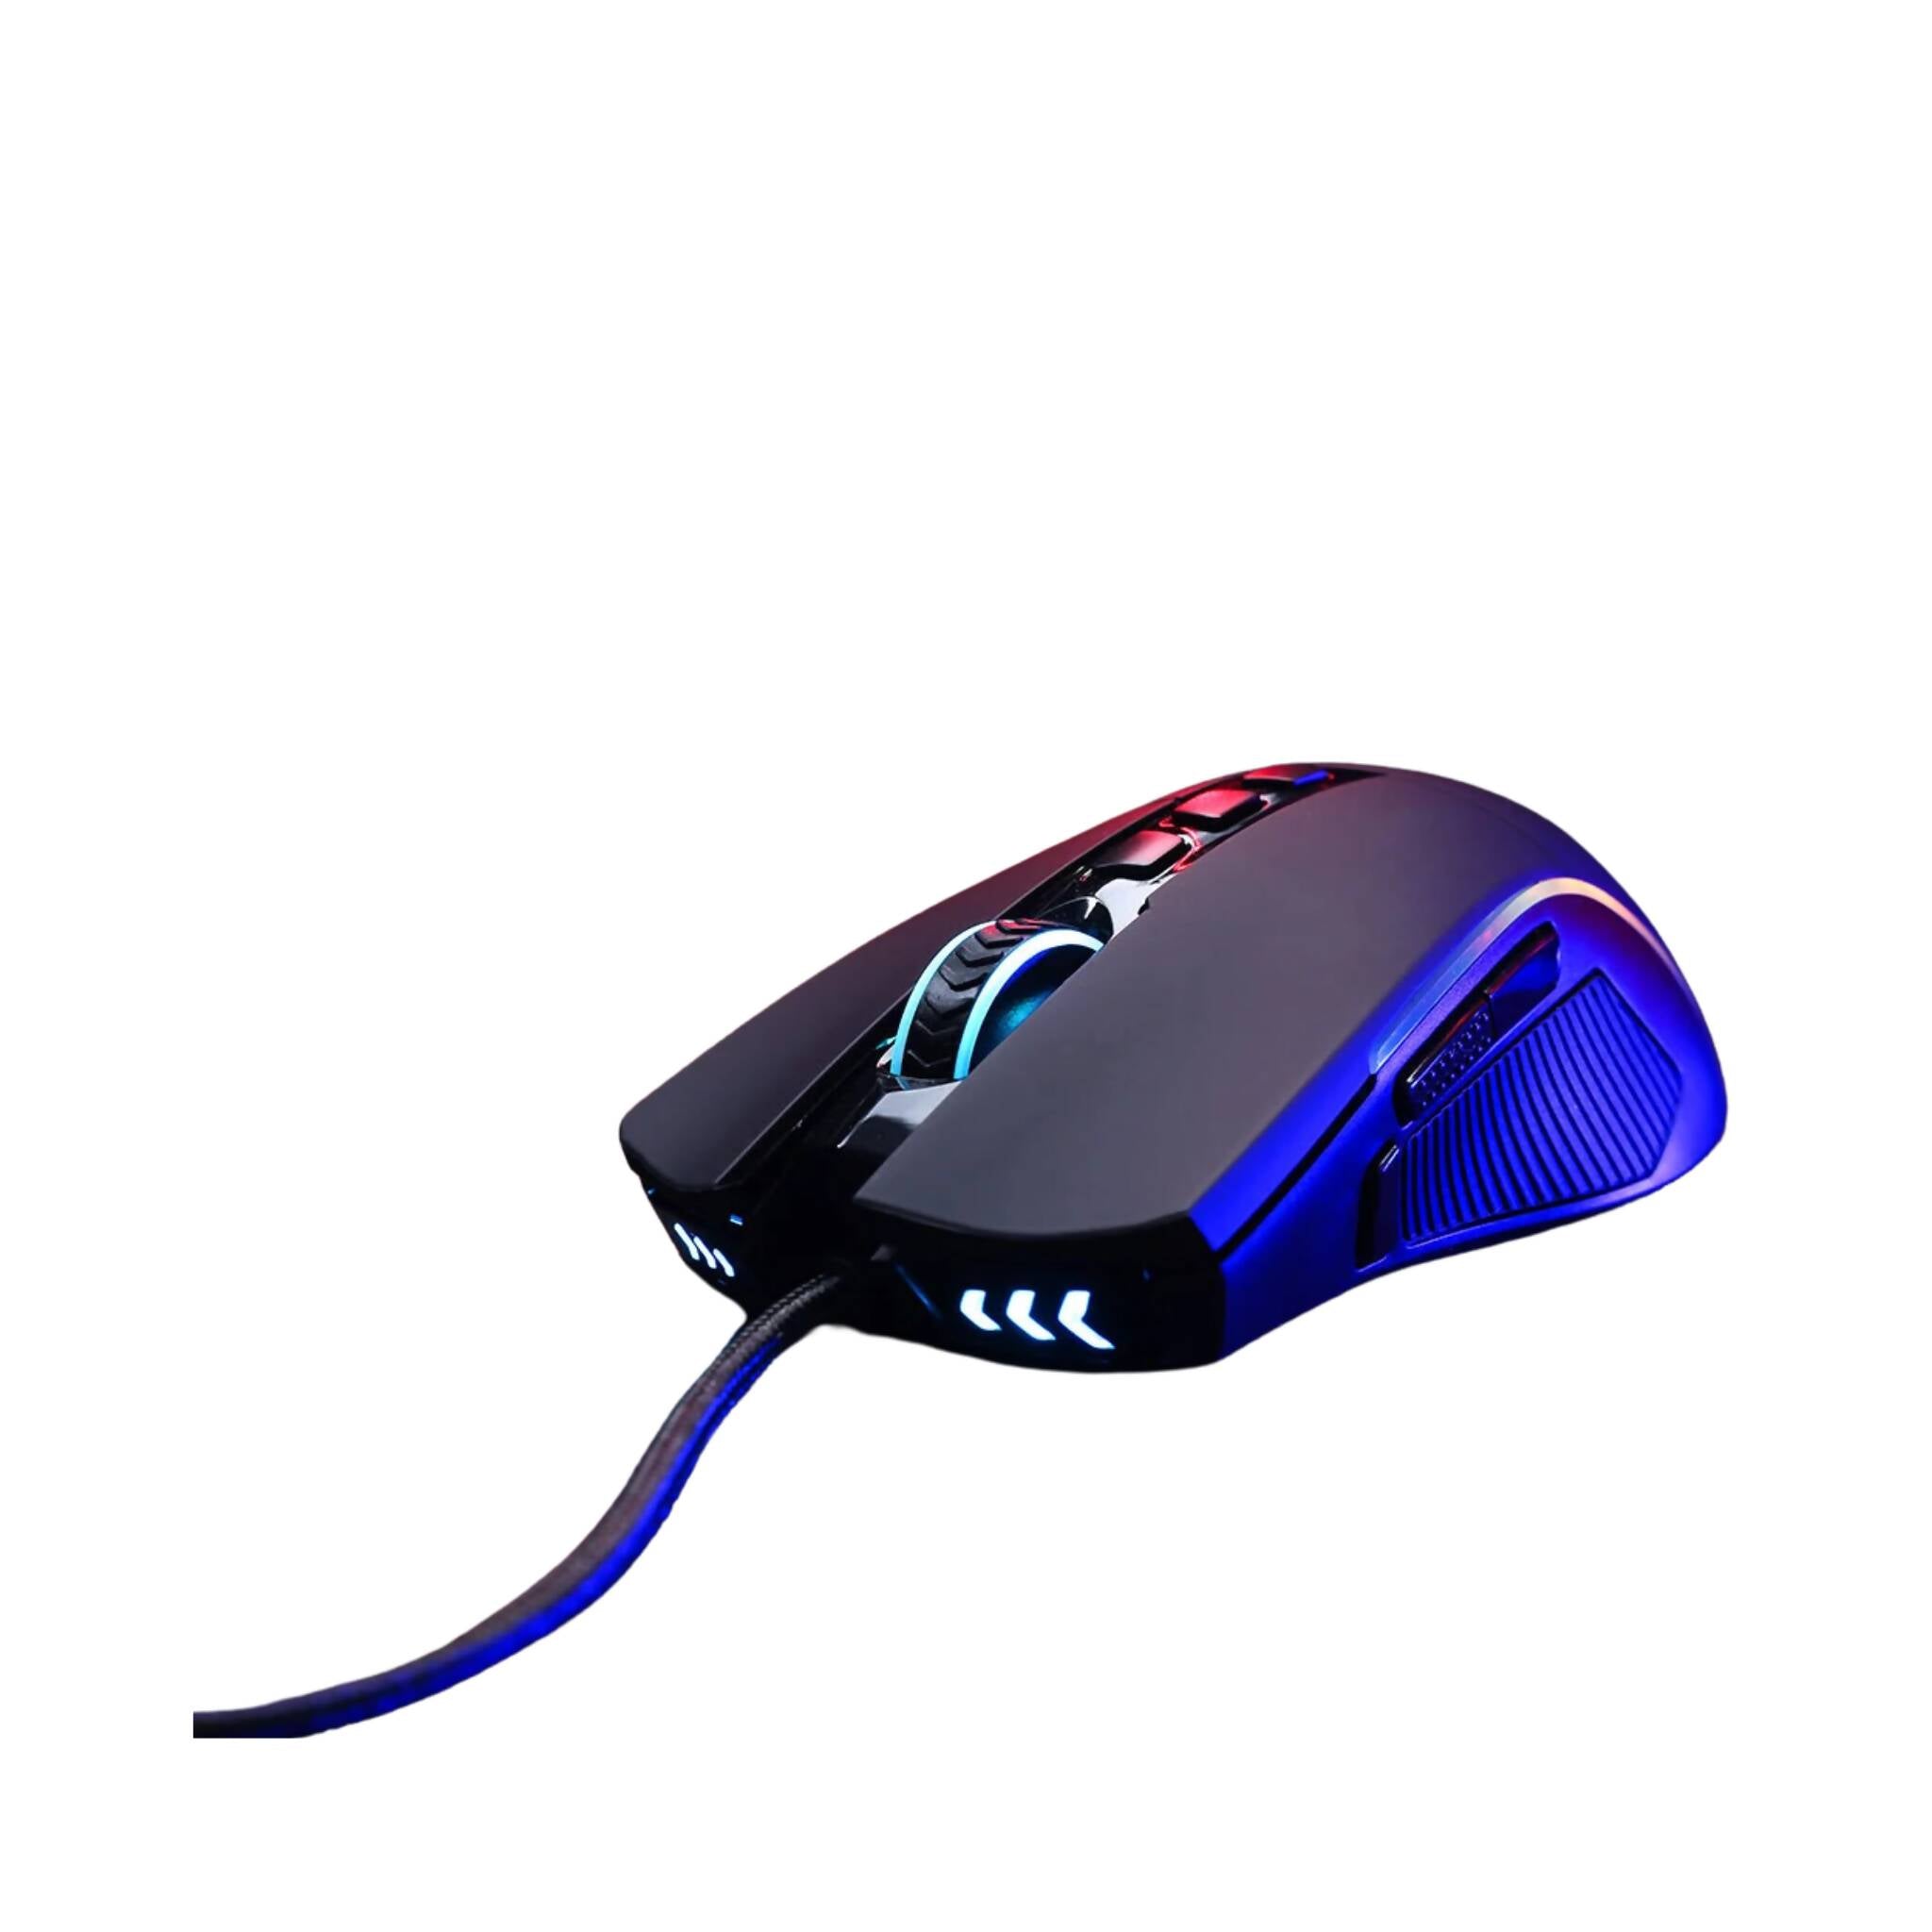 Mouse, Precision Gaming Duo with Ergonomic Design & Customizable Features